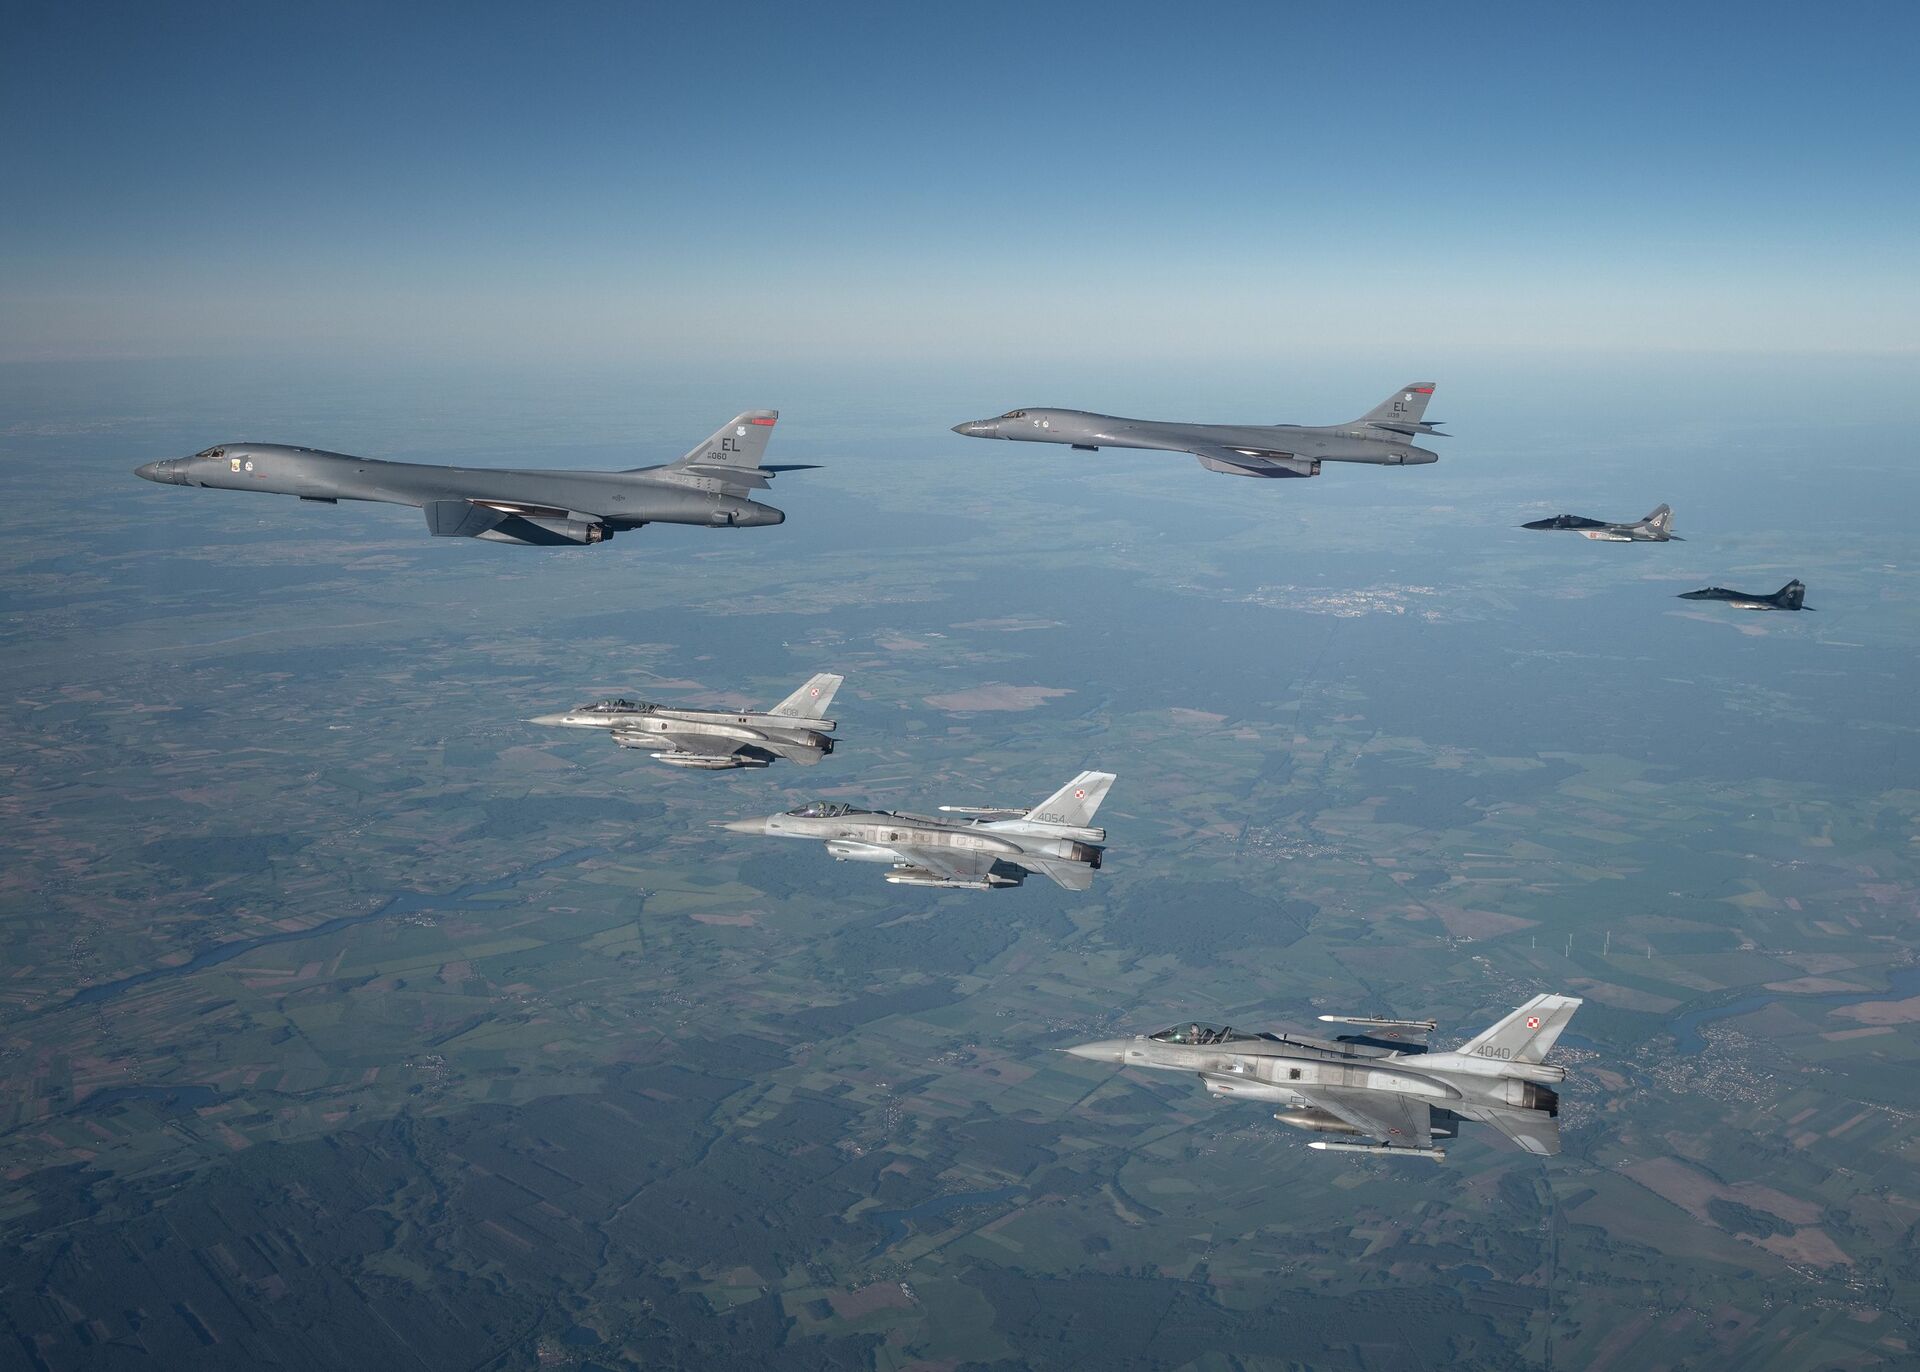 Polish F-16s and MiG-29s escort a B1B Lancer during a training mission for Bomber Task Force Europe, May 29, 2020. - Sputnik International, 1920, 28.01.2022